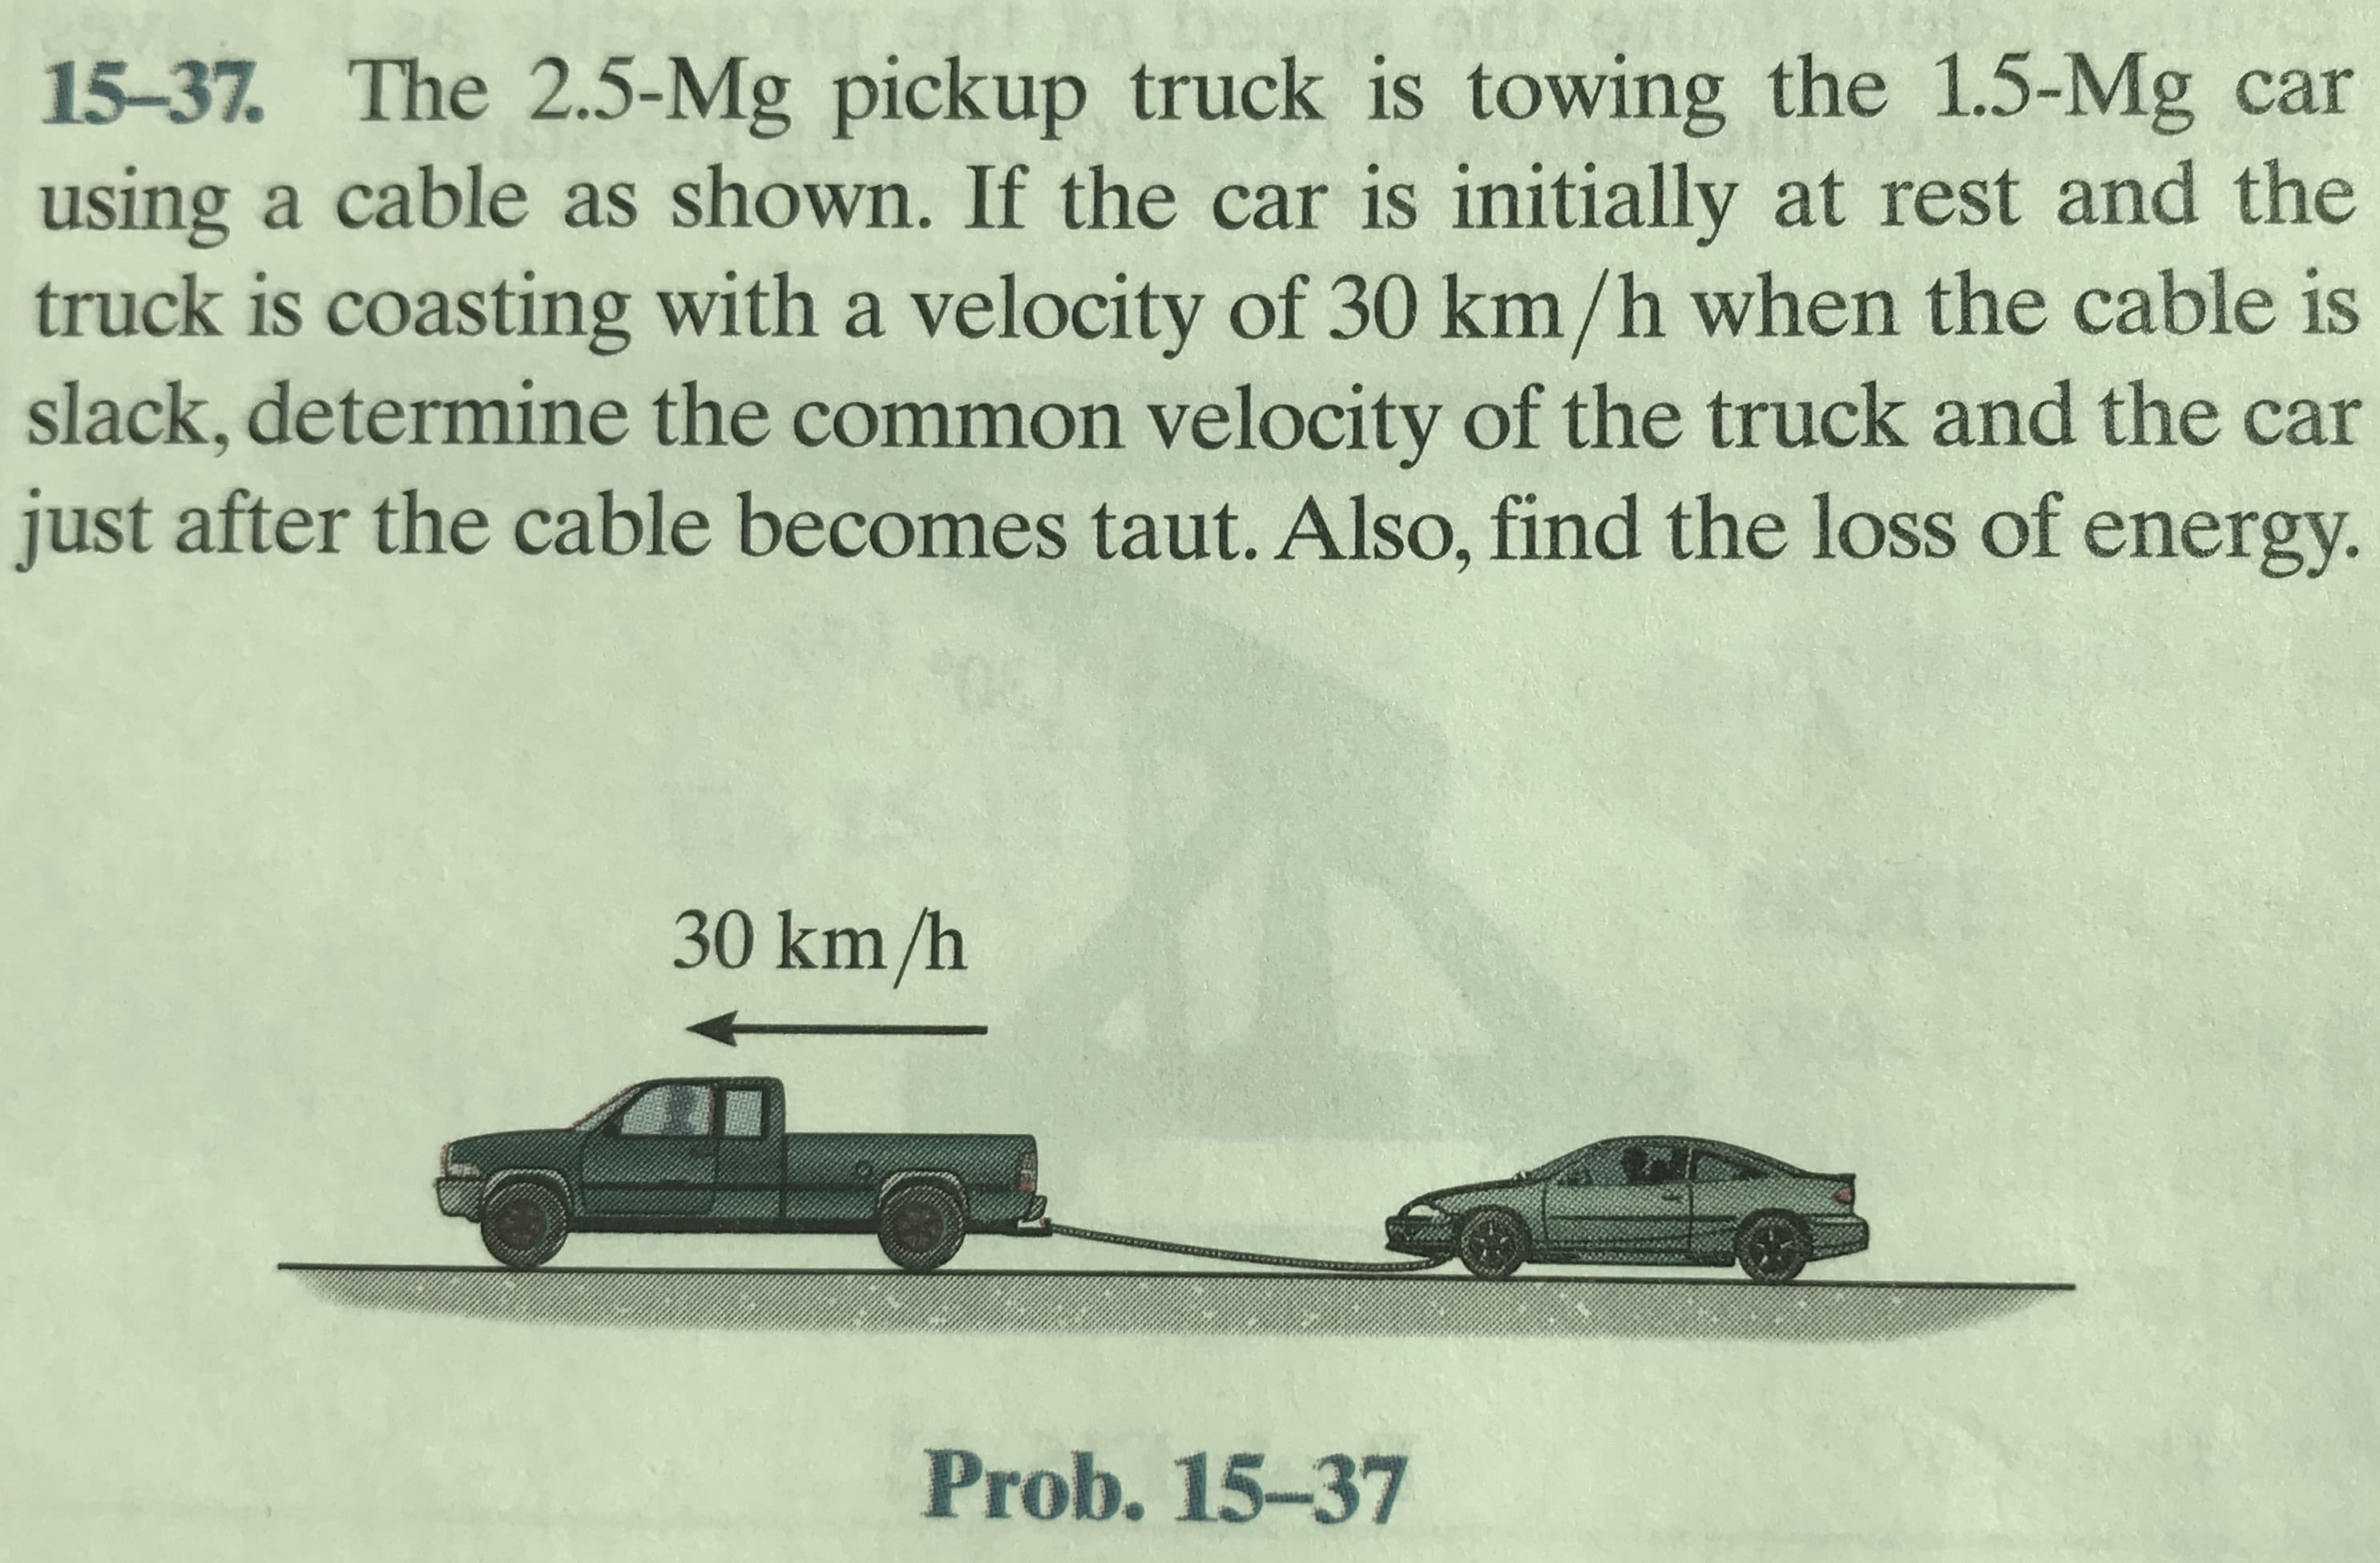 15-37. The 2.5-Mg pickup truck is towing the 1.5-Mg car
using a cable as shown. If the car is initially at rest and the
truck is coasting with a velocity of 30 km/h when the cable is
slack, determine the common velocity of the truck and the car
just after the cable becomes taut. Also, find the loss of energy.
30 km/h
Prob. 15-37
